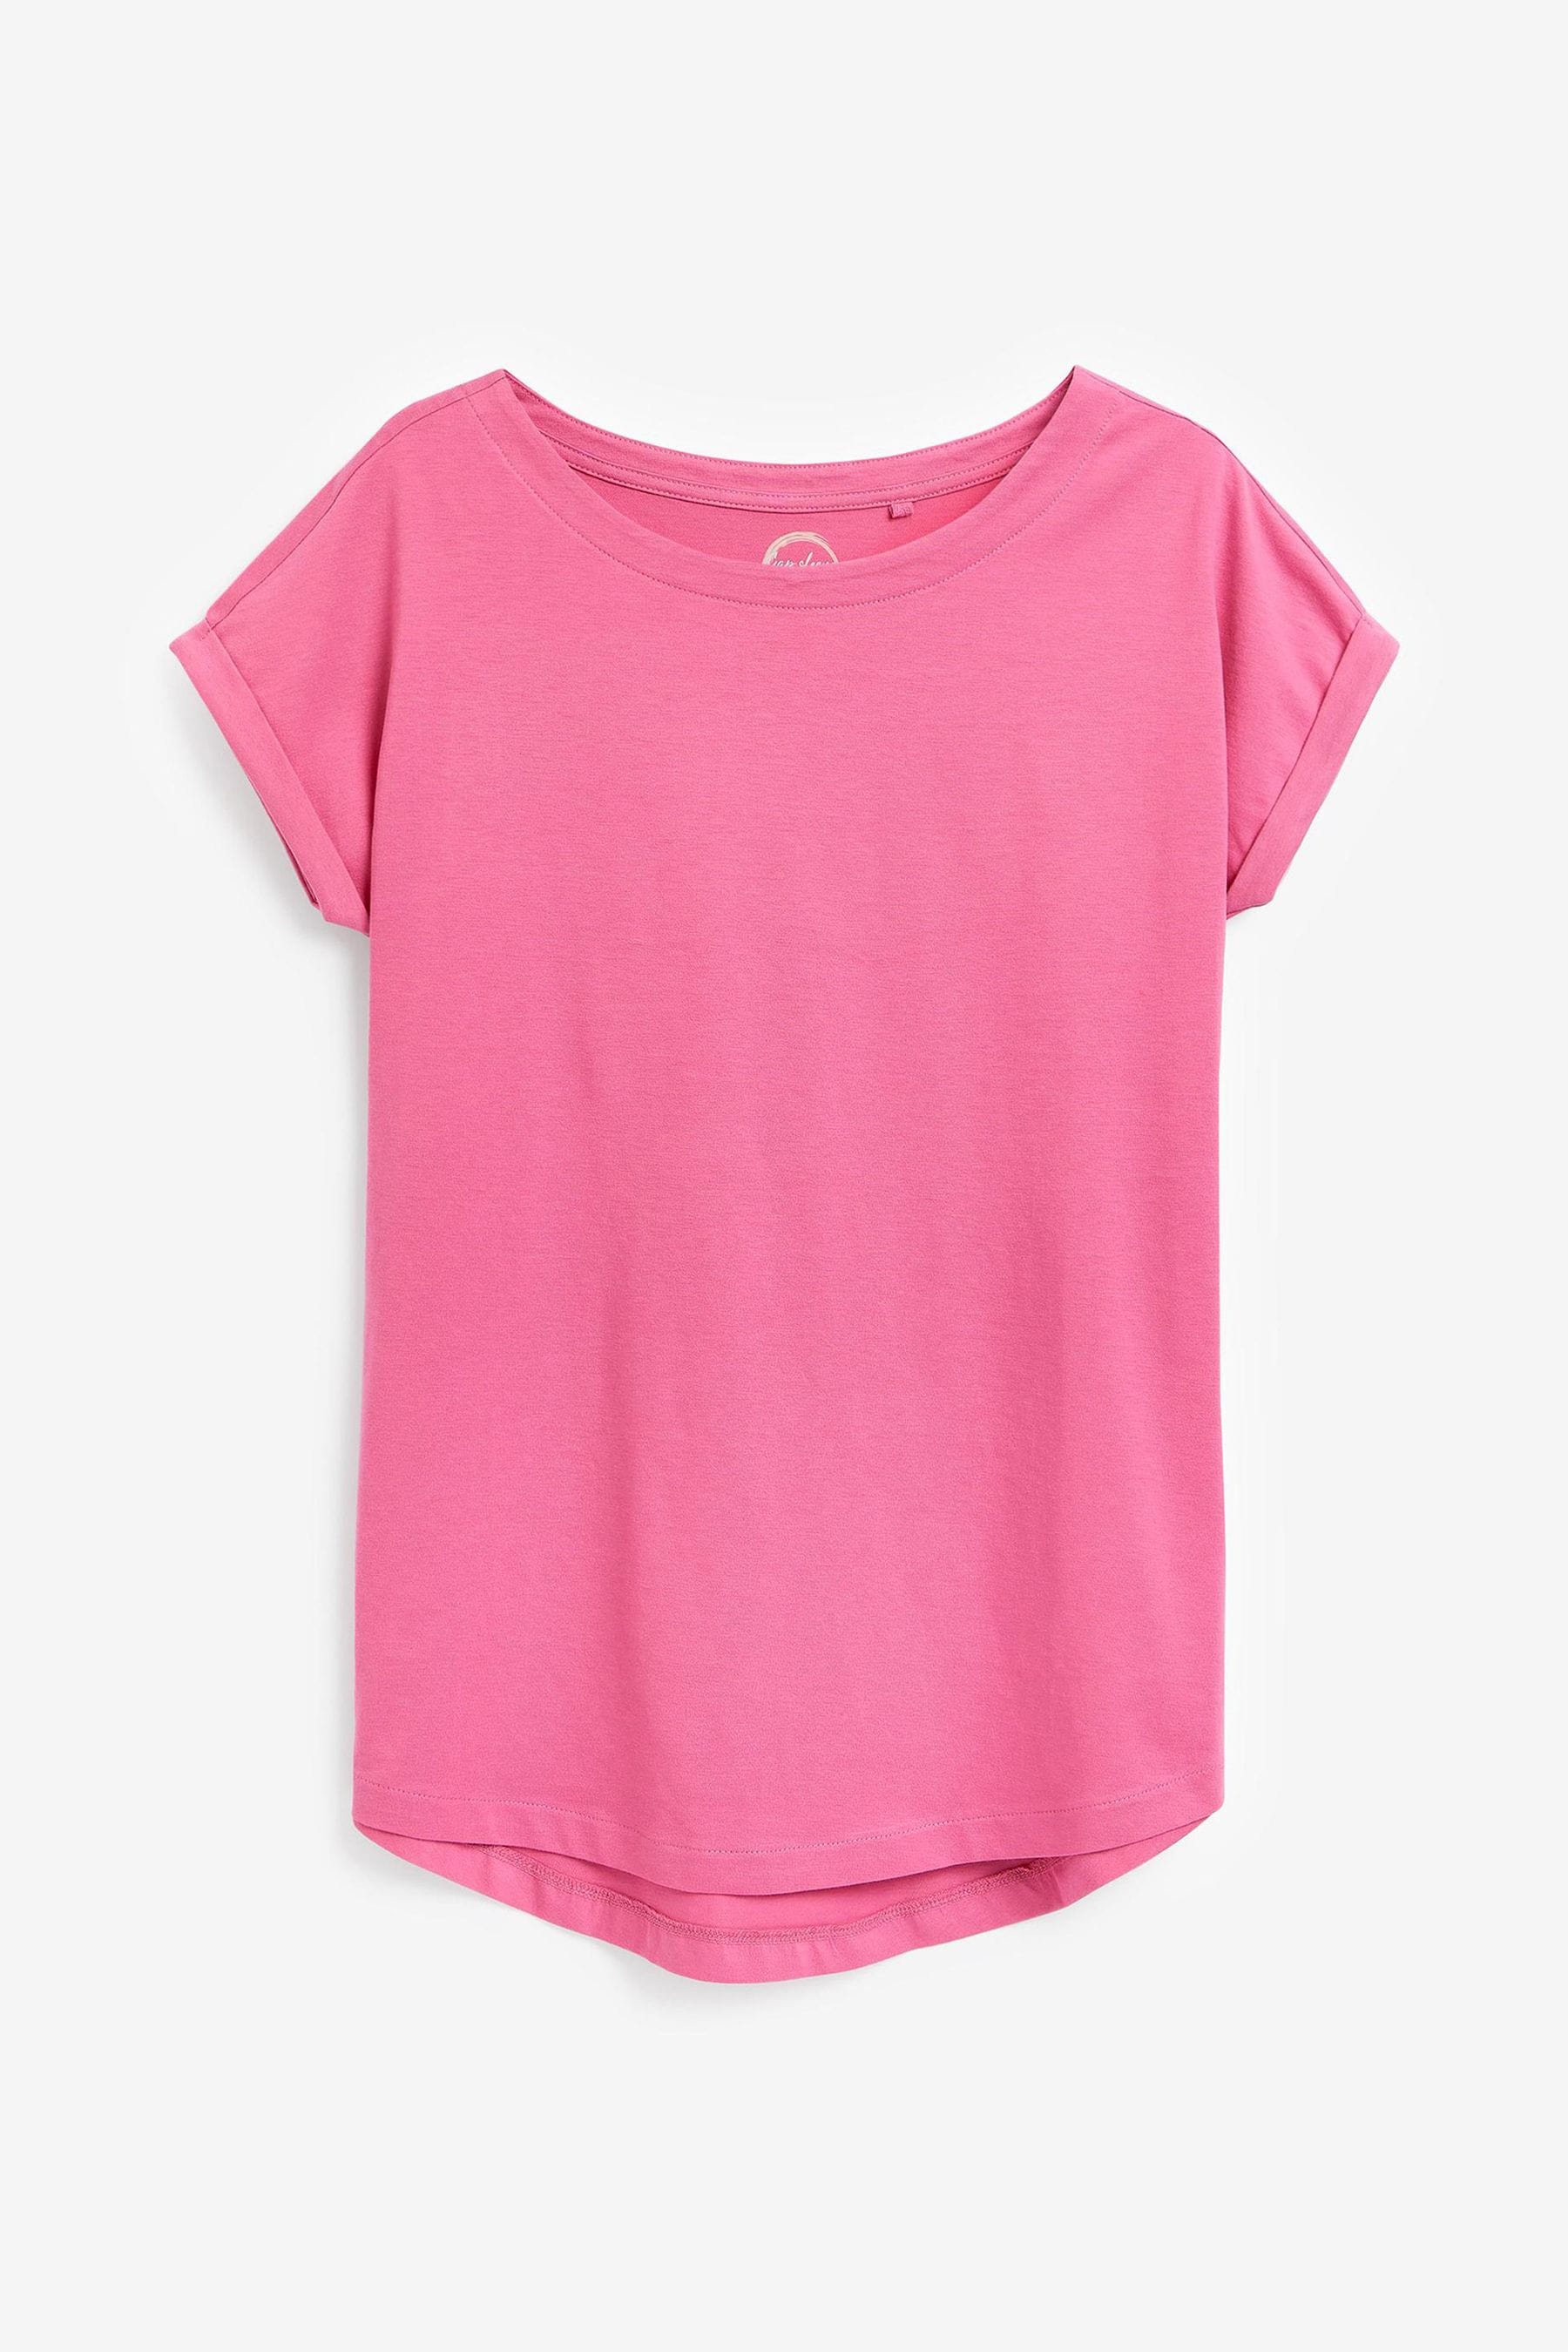 Buy Bright Pink Round Neck Cap Sleeve T-Shirt from the Next UK online shop